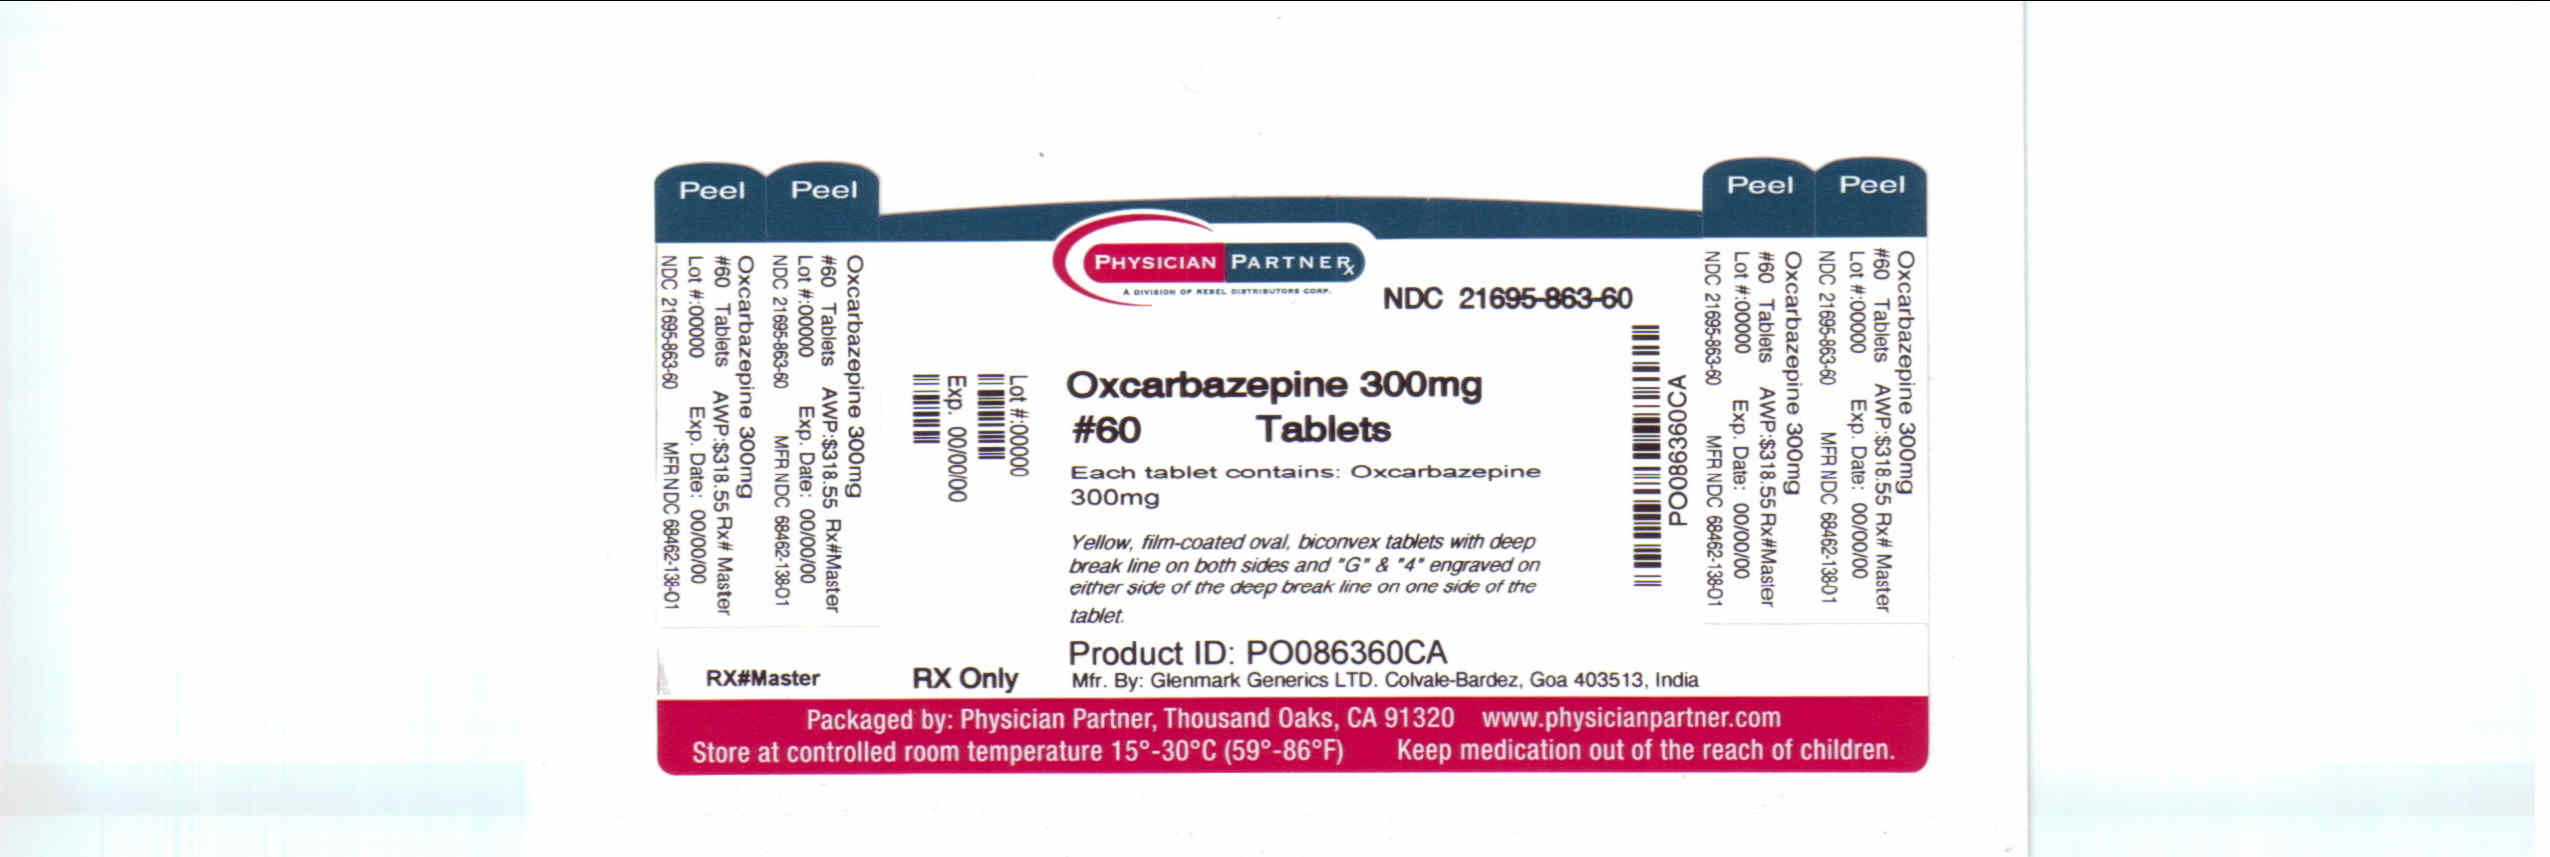 Oxcarbazepine 300mg